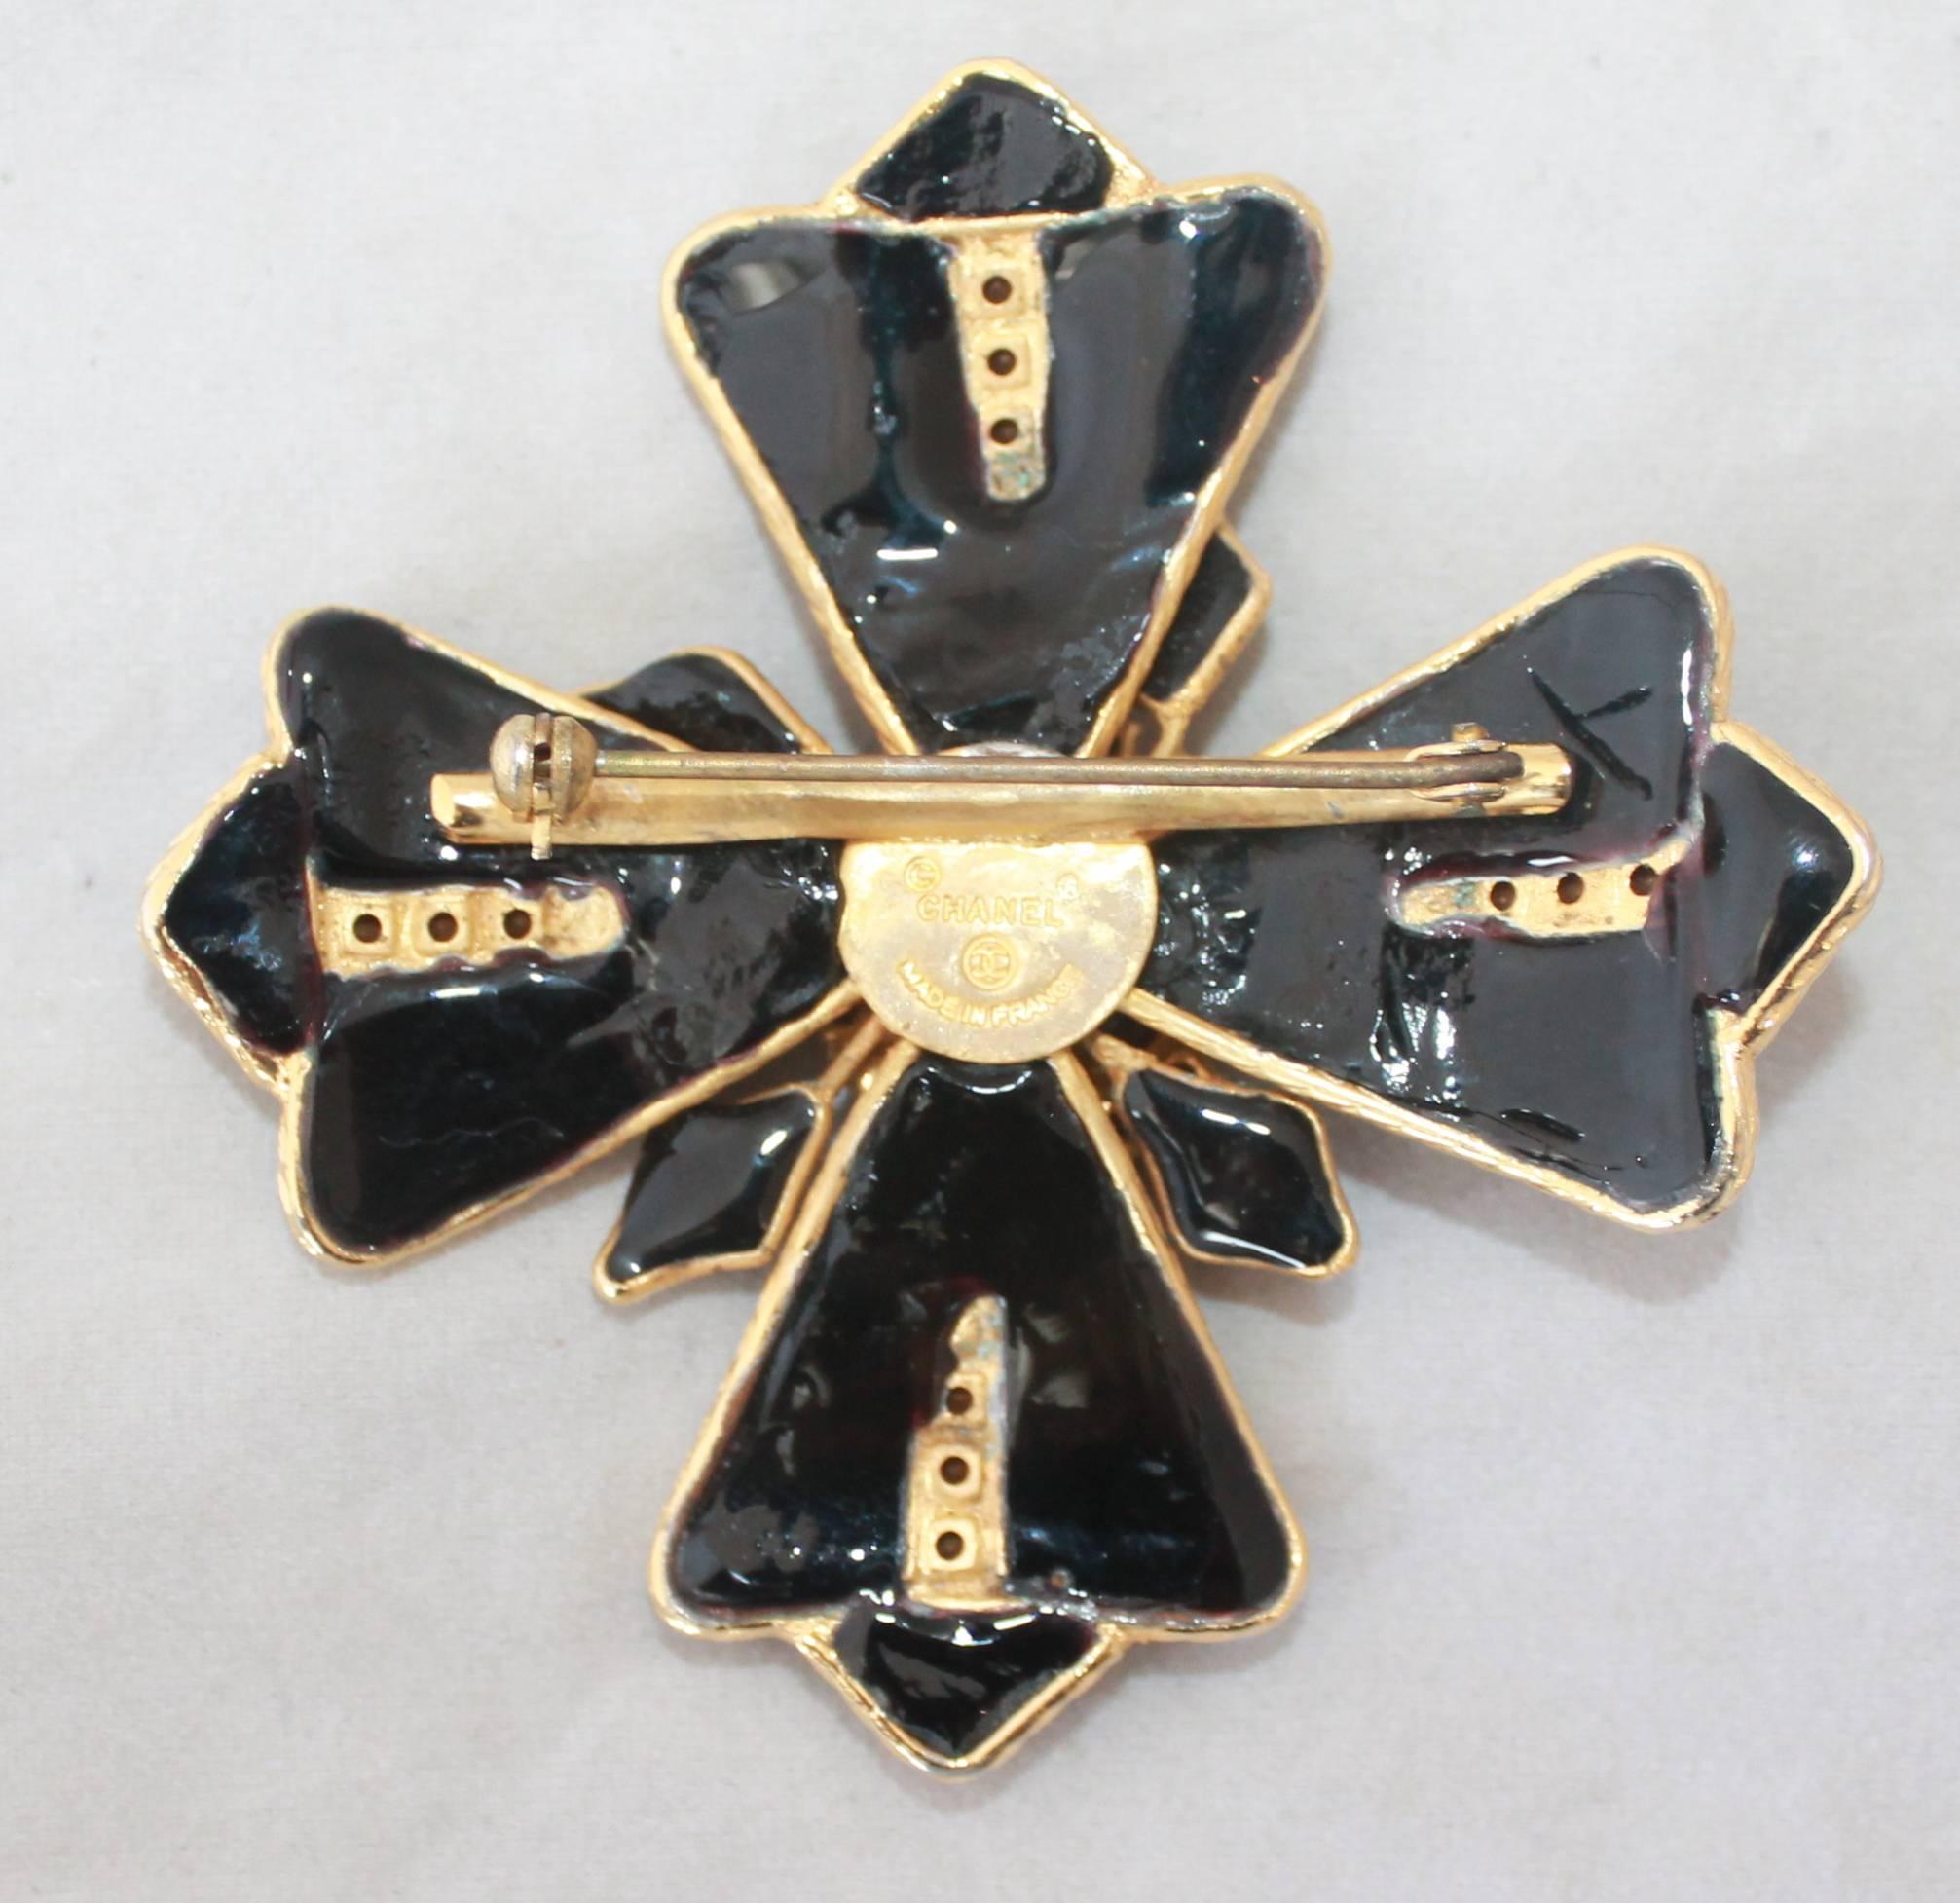 Chanel 1970's Goldtone Black Maltese Brooch Cross with Rhinestones. This piece is in excellent condition and is one of a kind. It has black enamel & a goldtone color. It is in excellent vintage condition. 

Measurements:
Length & Width- 2.75 x